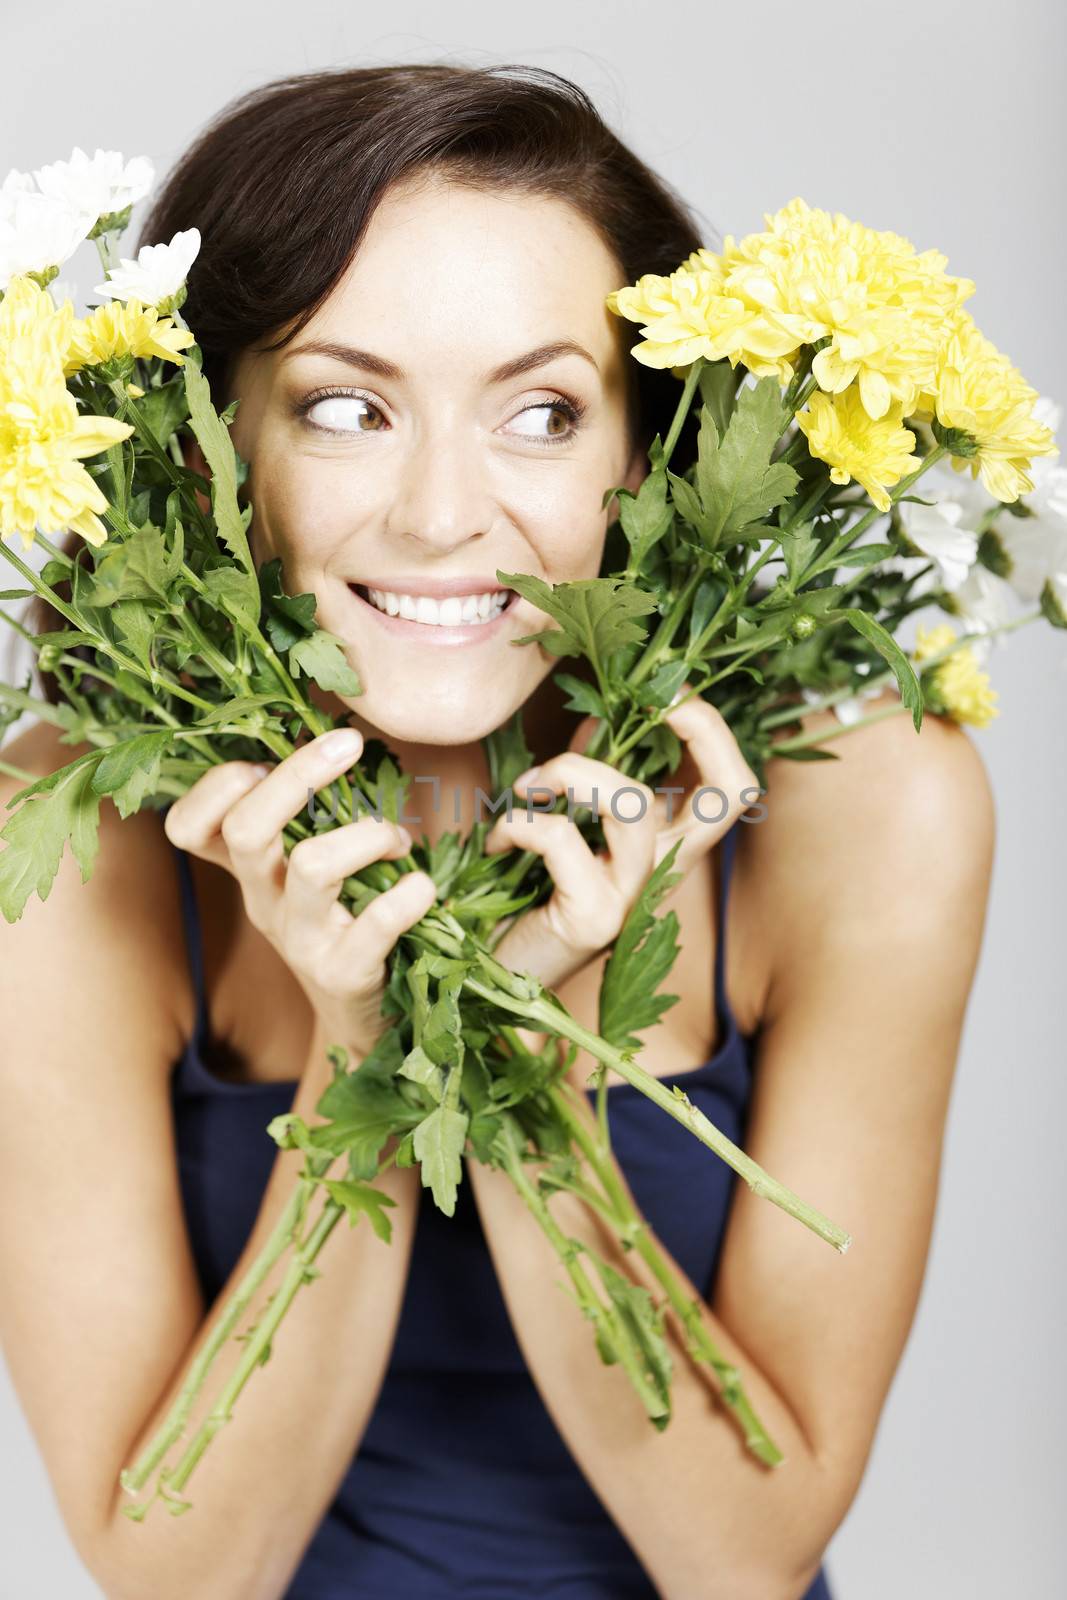 Young woman looking through two bunches of flowers